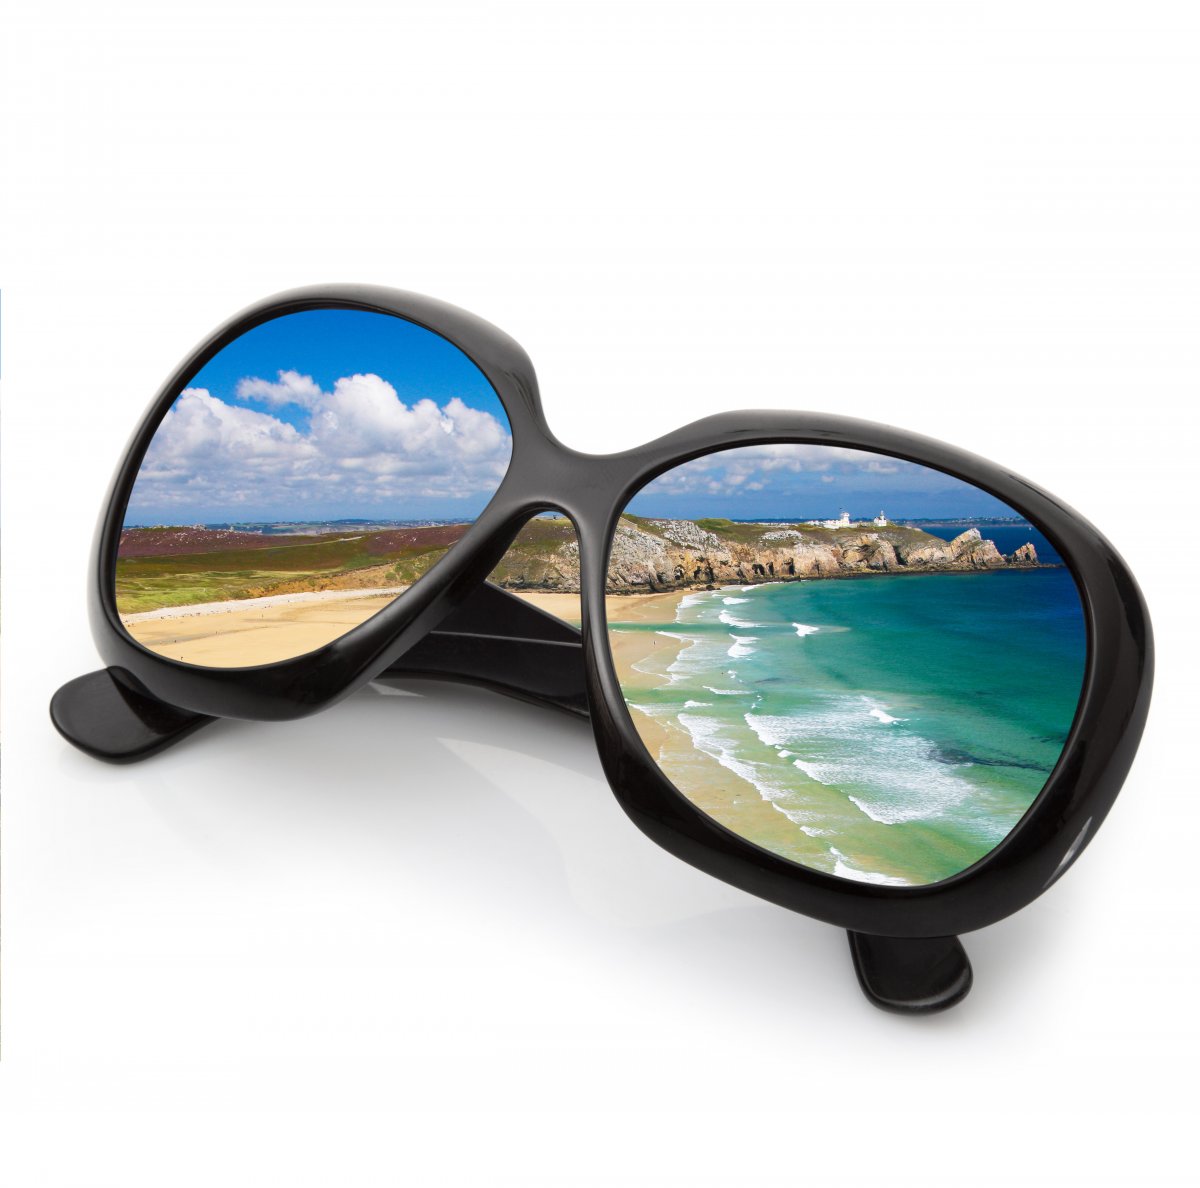 Pictures of the seaside in sunglasses